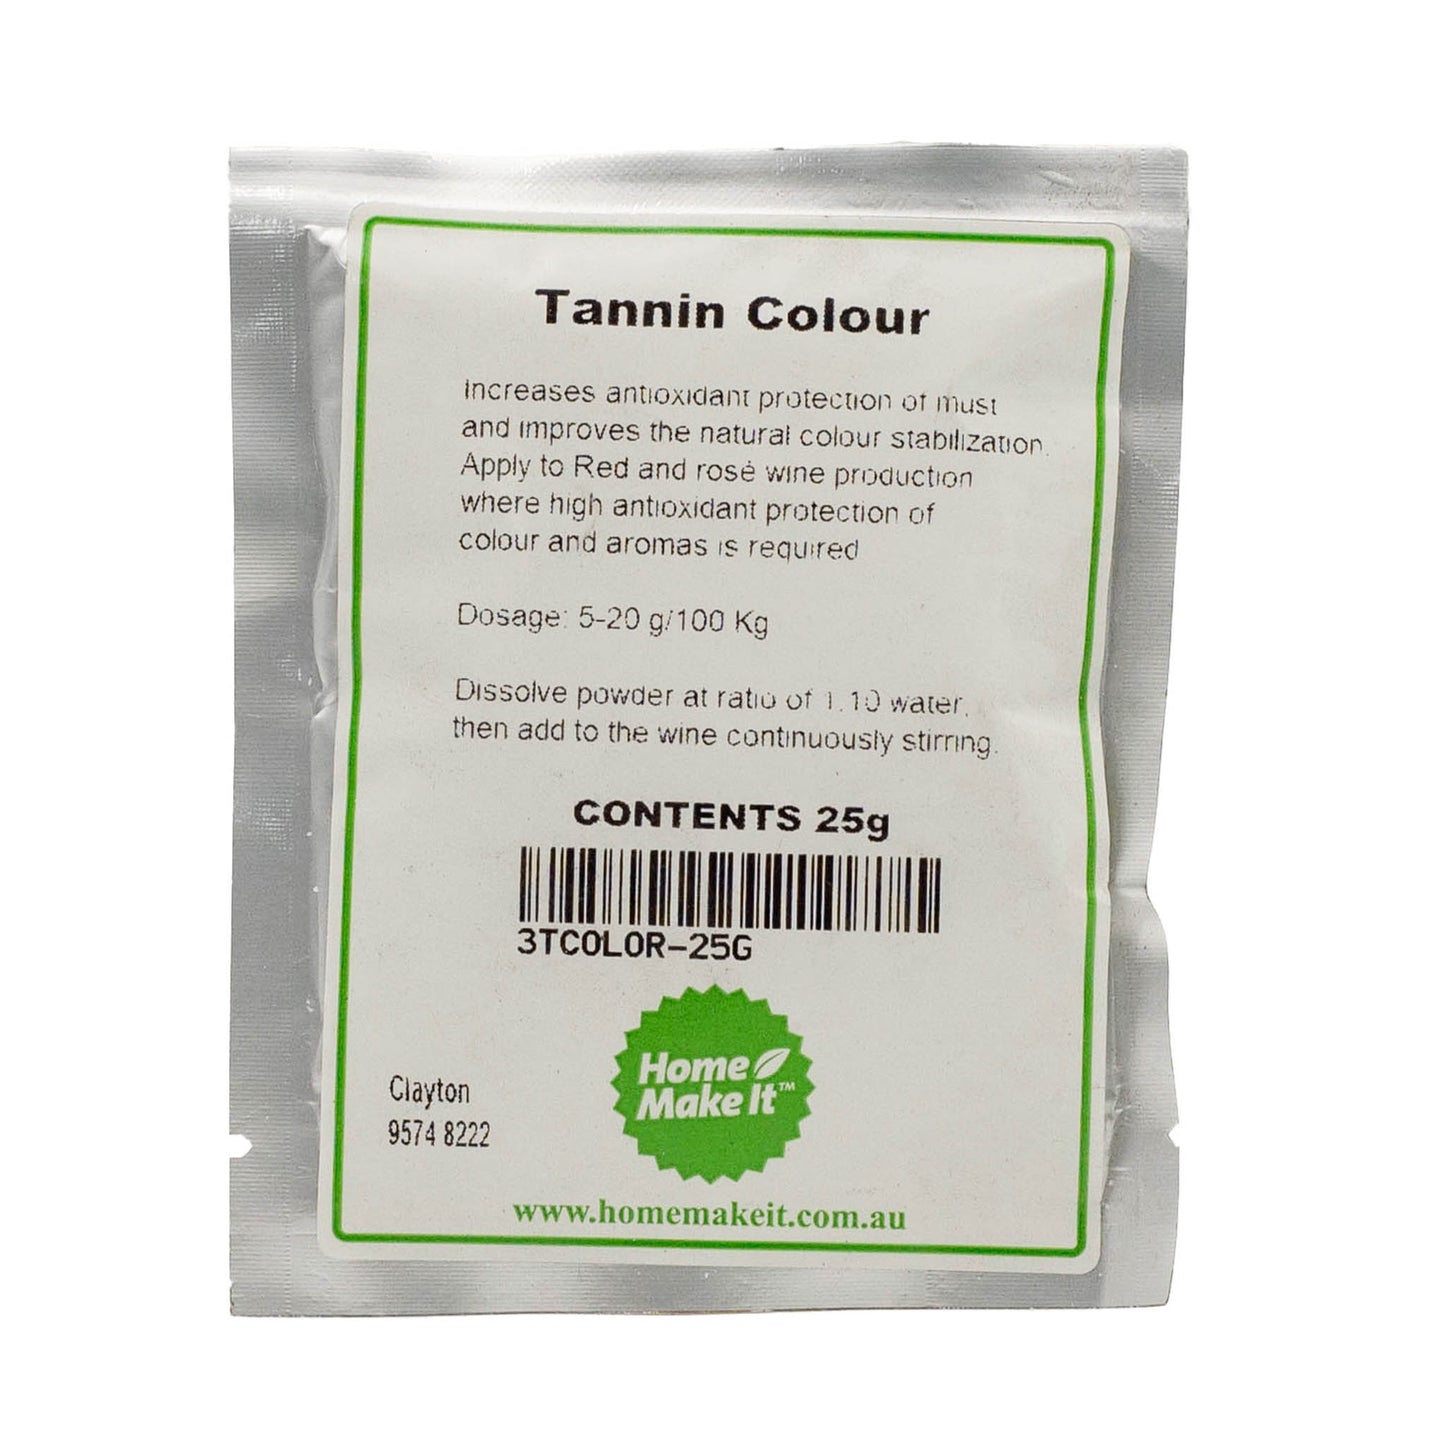 25g packet of tannin colour, Increases antioxidant protection of must and improves the natural colour stabilisation